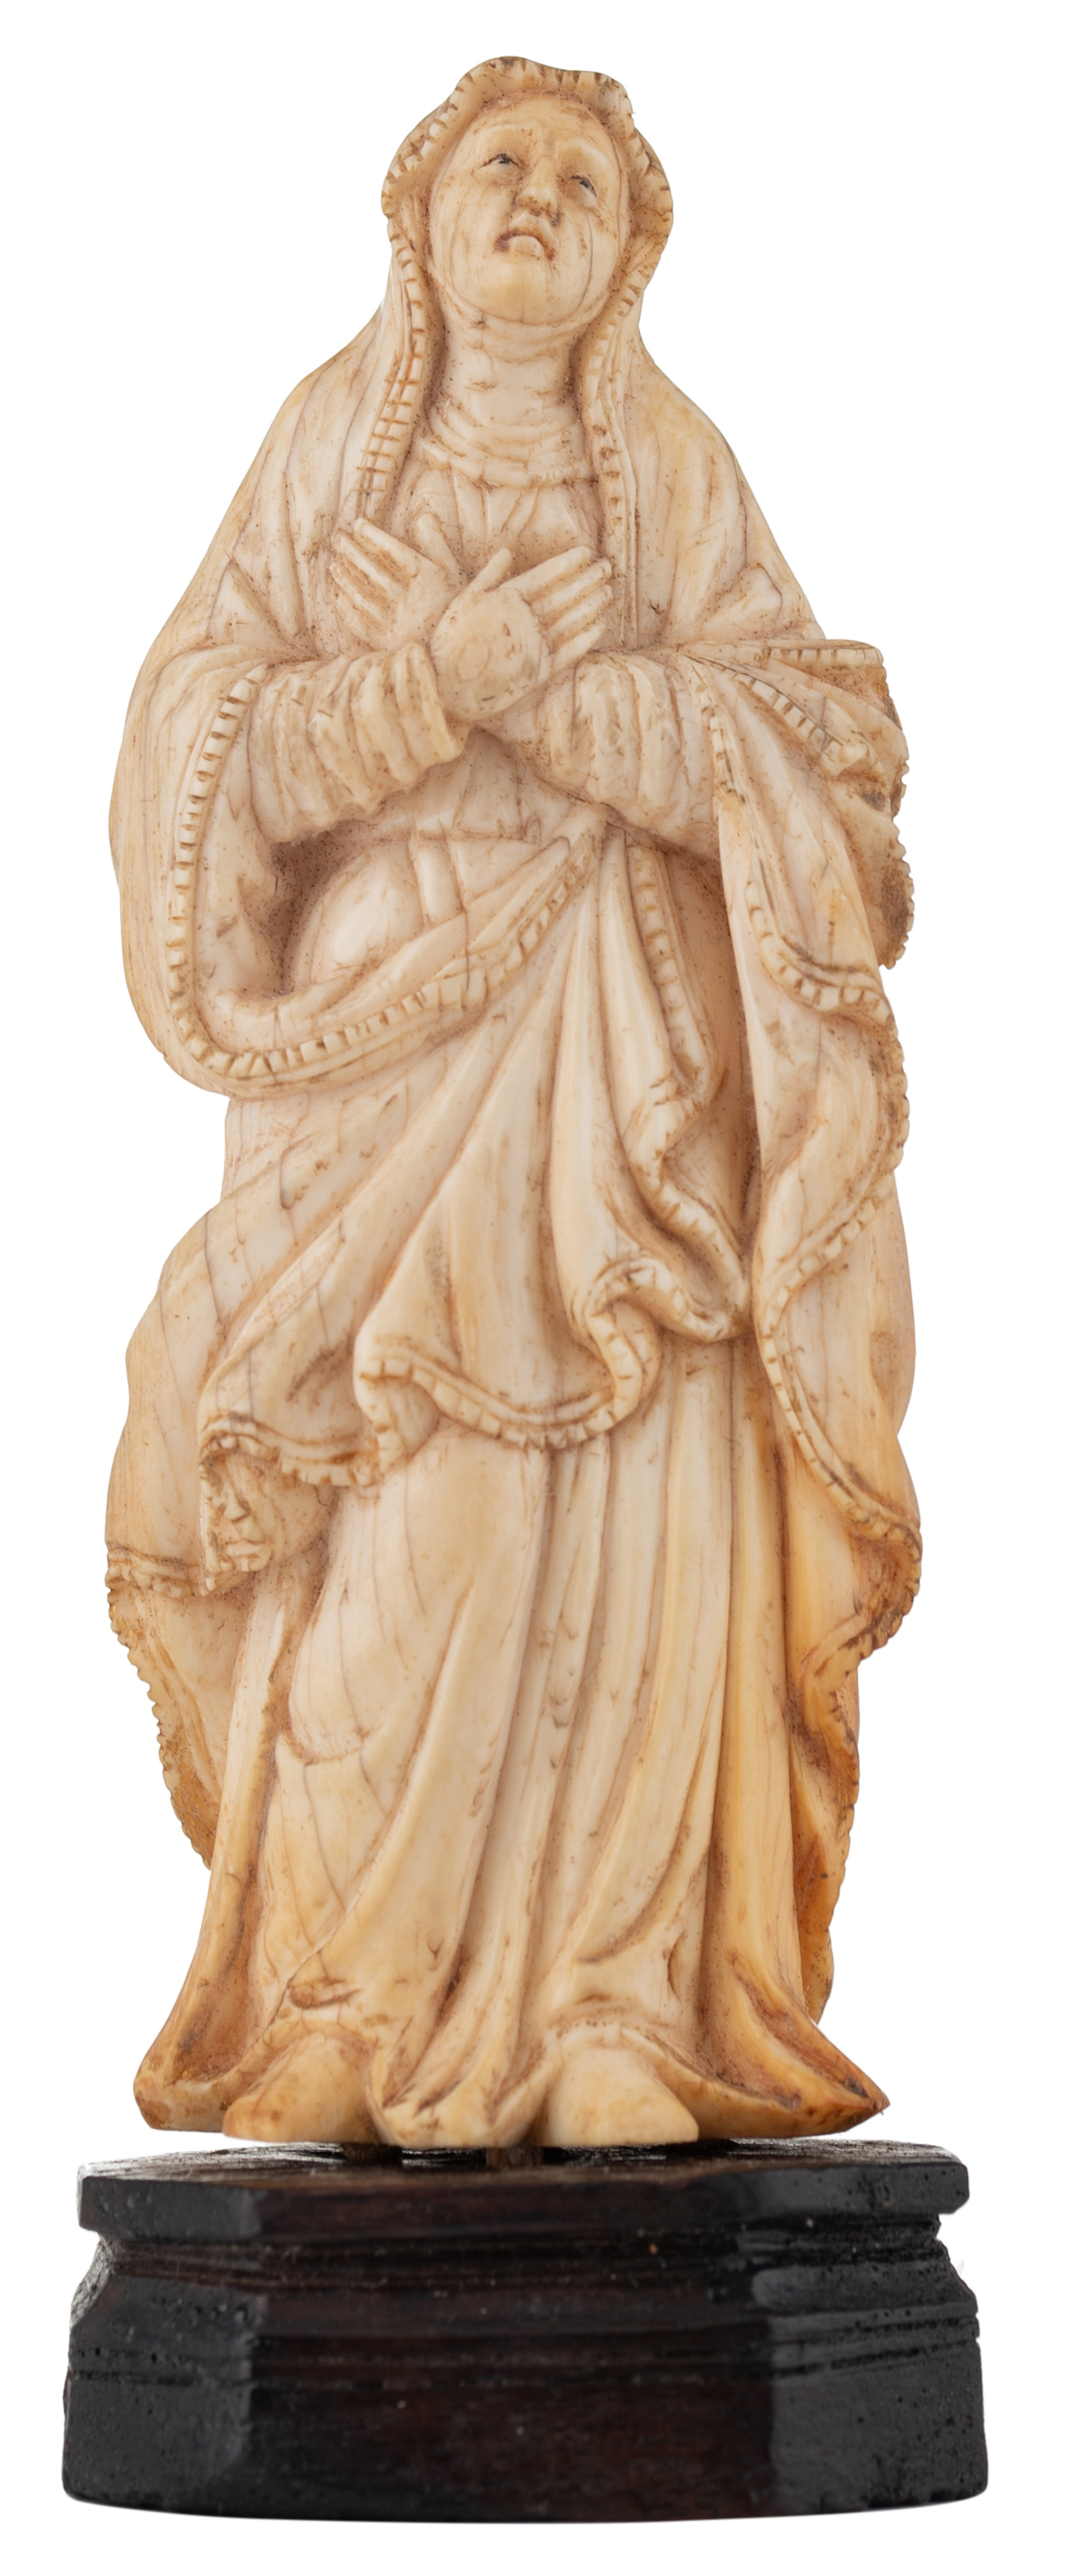 A probably Dieppe ivory sculpture depicting the mourning Holy Mother, 18th/19thC, H 11 - 12,5 cm (